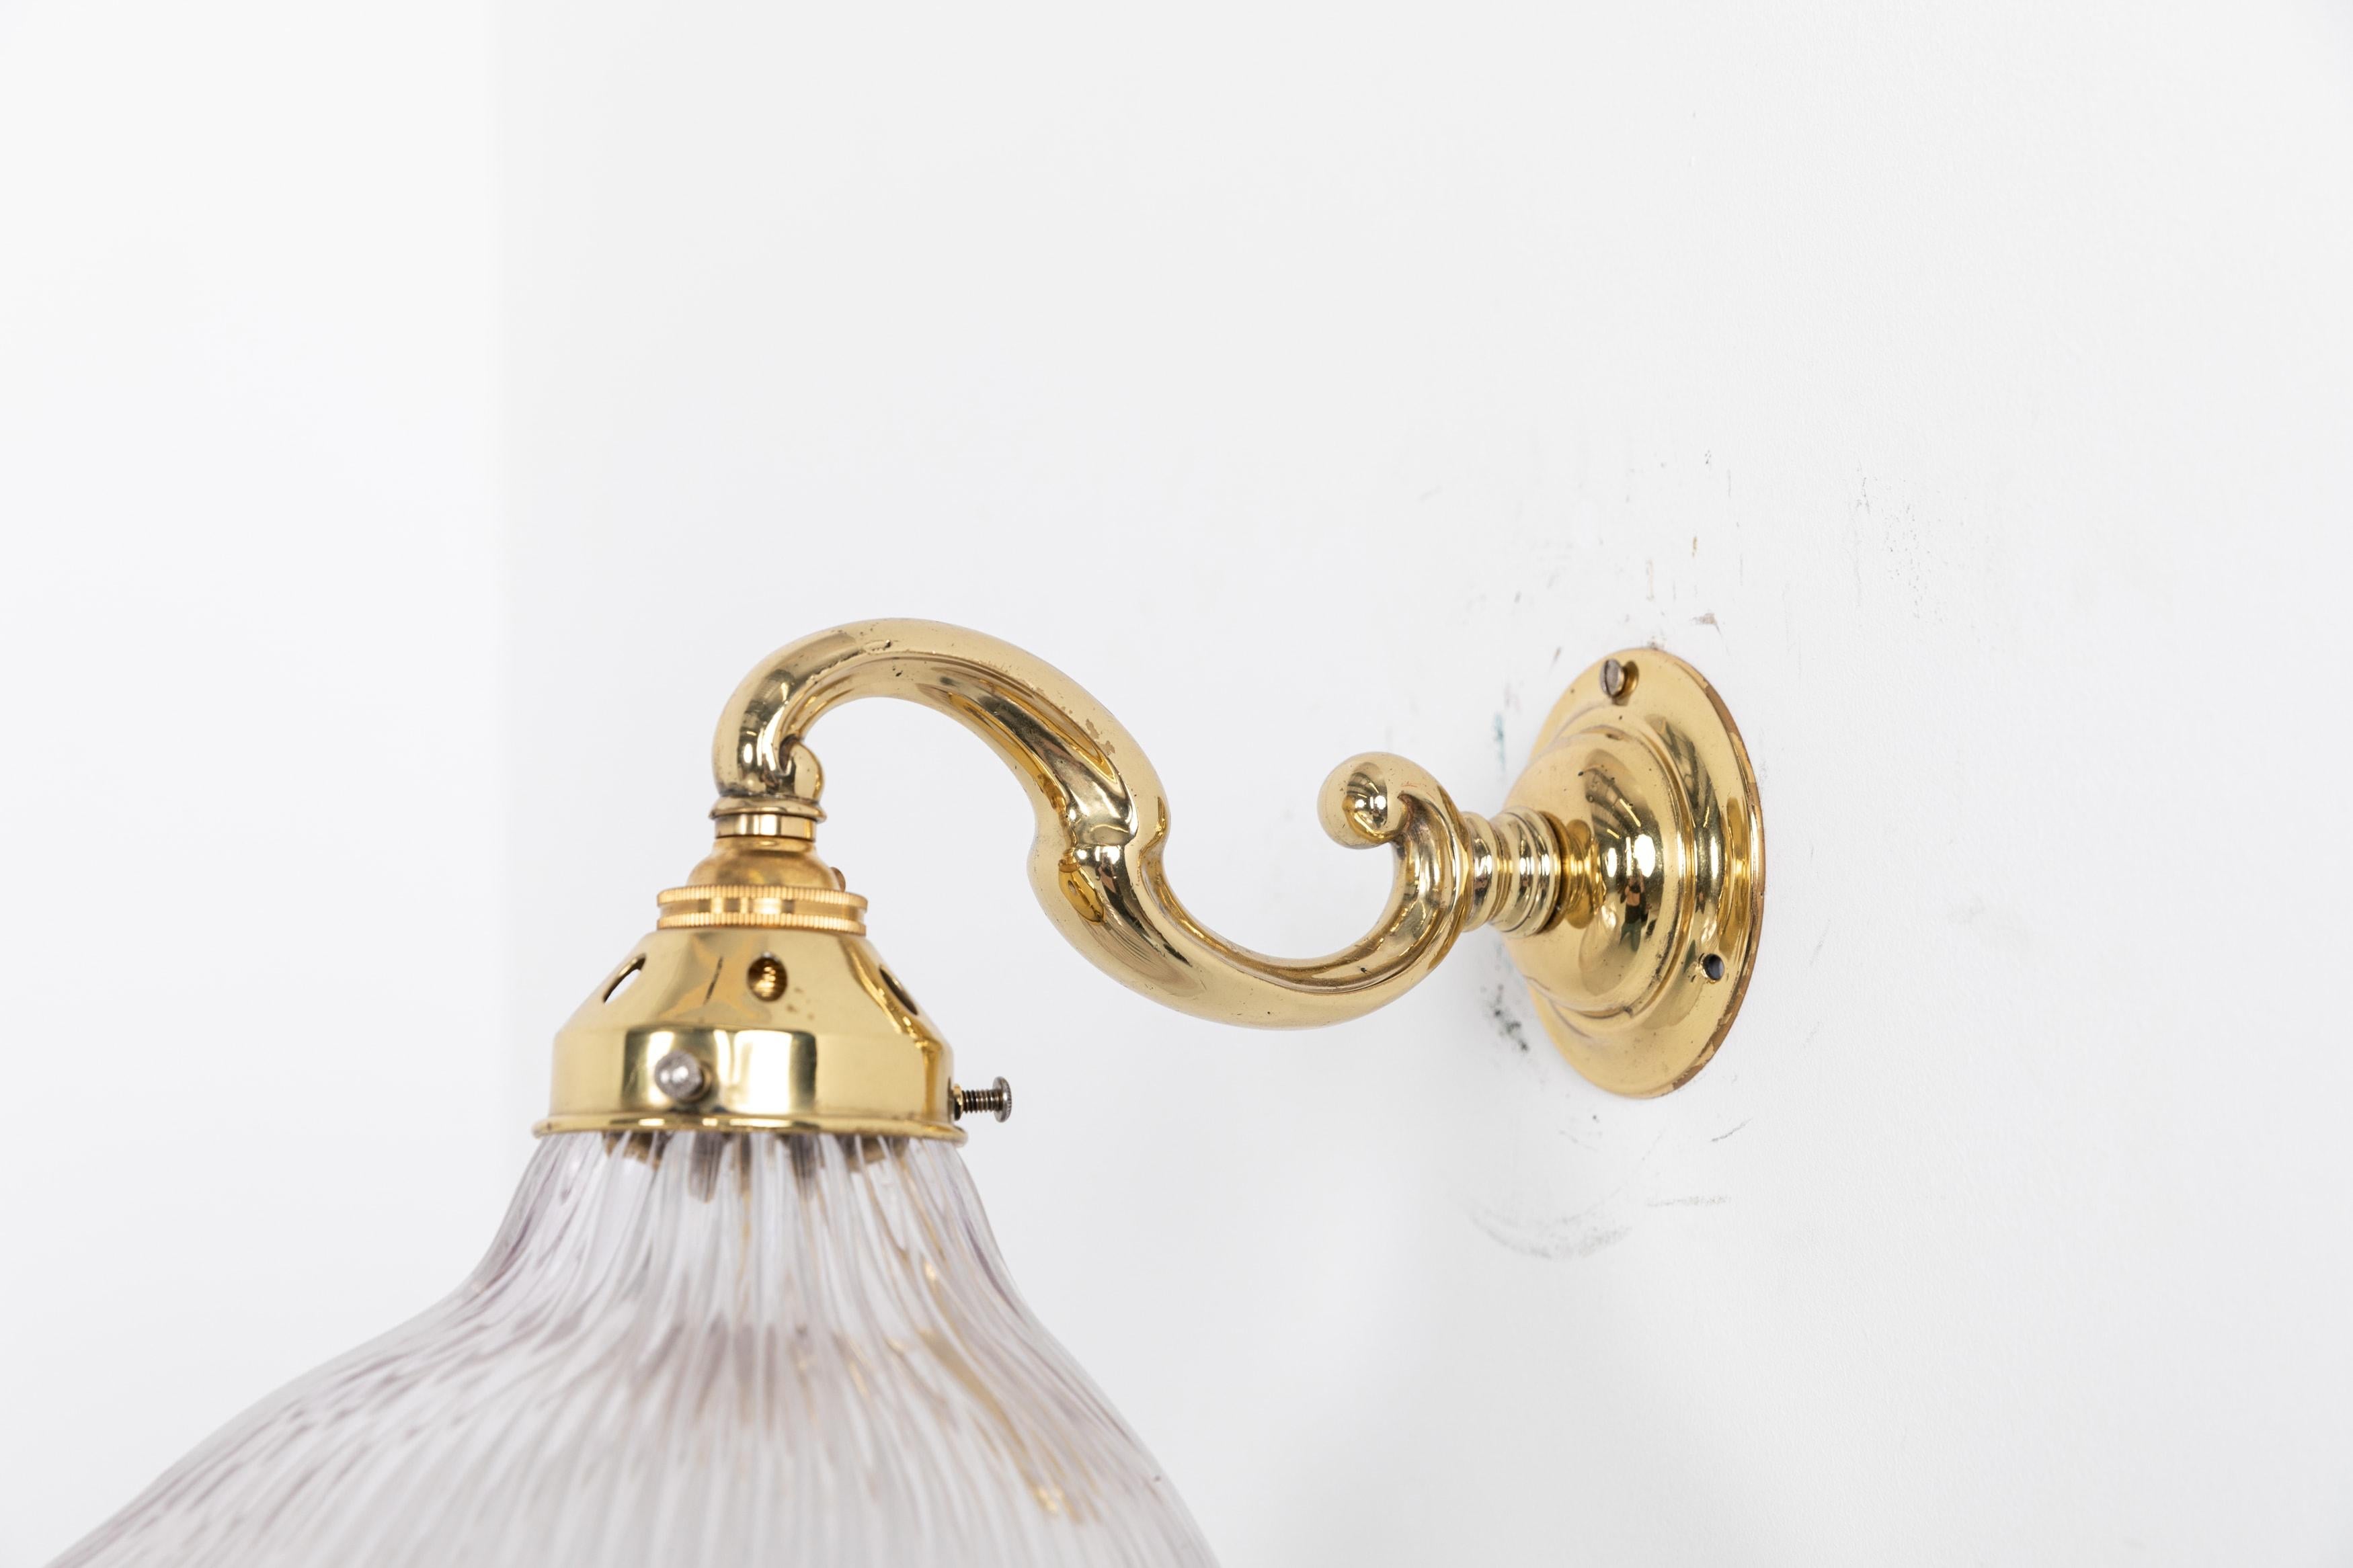 A stunning wall brass wall lamp made in England by Holophabe, circa 1920

Polished brass swan-neck wall mount with an elliptical prismatic glass Holophane 'Stiletto' shade. Glass stamped Holophane to the rim.

Rewired to connect to